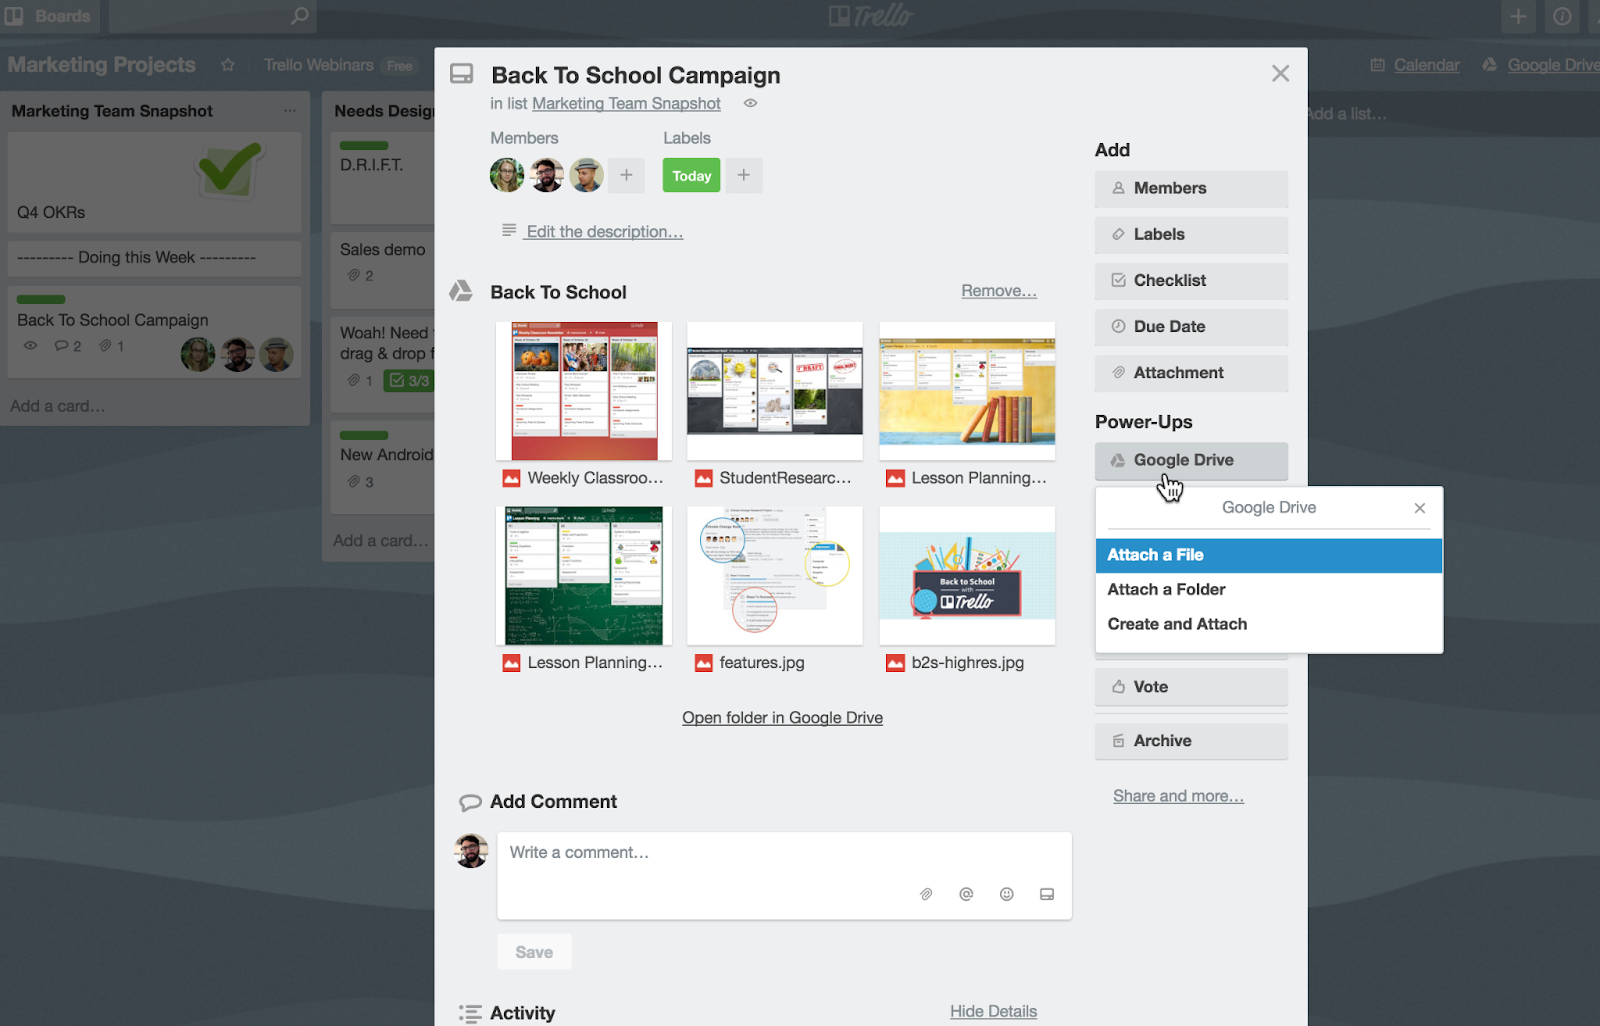 Google Drive as a Trello Power-Up is great for file management on Trello